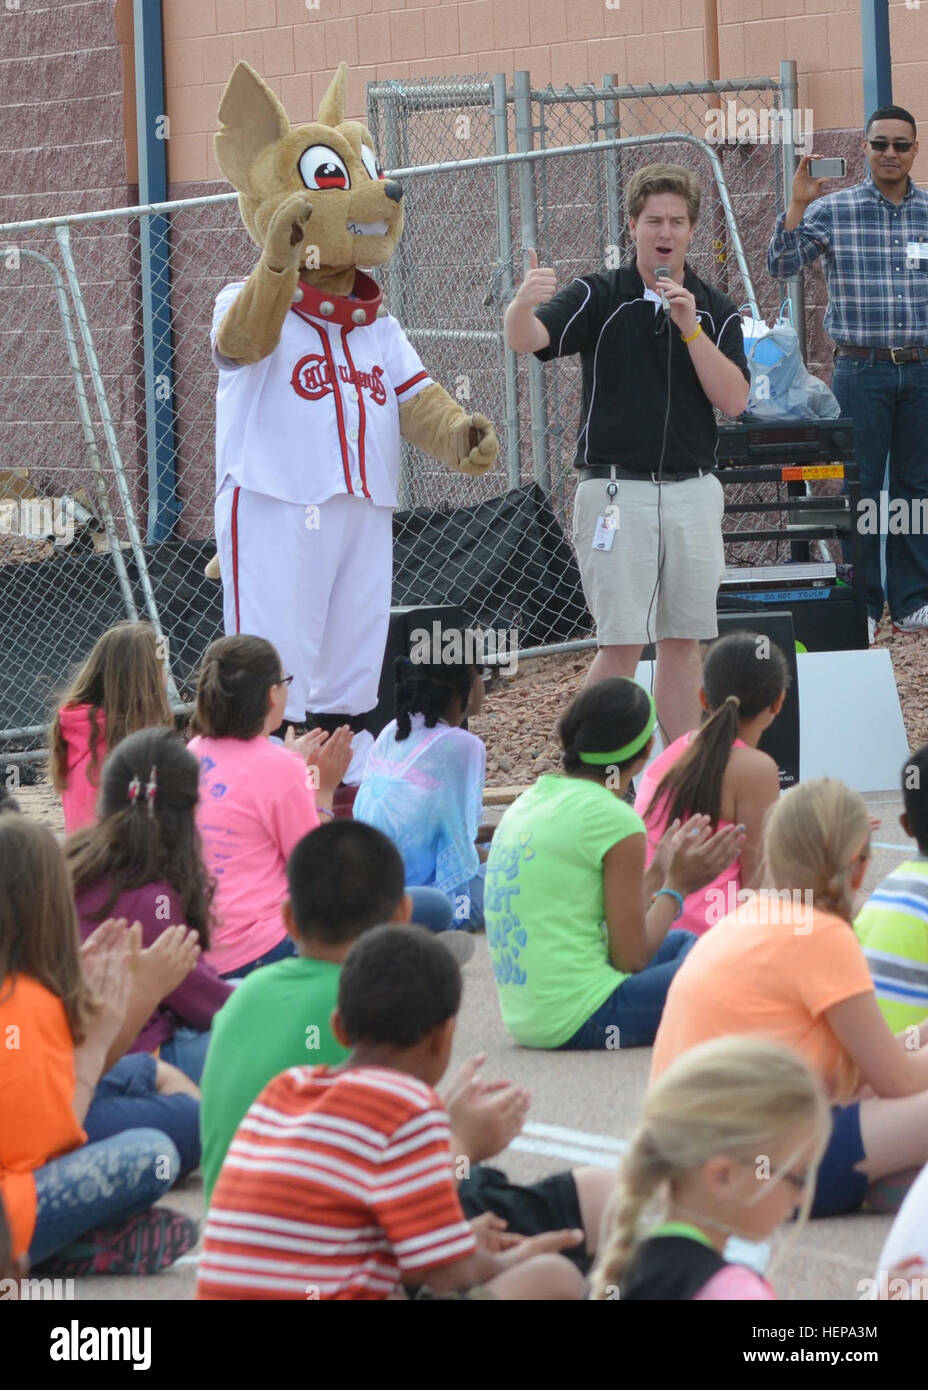 Chico the Chihuahua, the mascot for the El Paso Chihuahua baseball team, attends an assembly at Milam Elementary School, April 8, to show his appreciation for the school’s support of the Braden Aboud Foundation. The foundation holds a walk/run annually, earning money to donate shoes to local elementary schools. Braden Aboud Foundation donates shoes to Milam Elementary 150408-A-IX573-020 Stock Photo